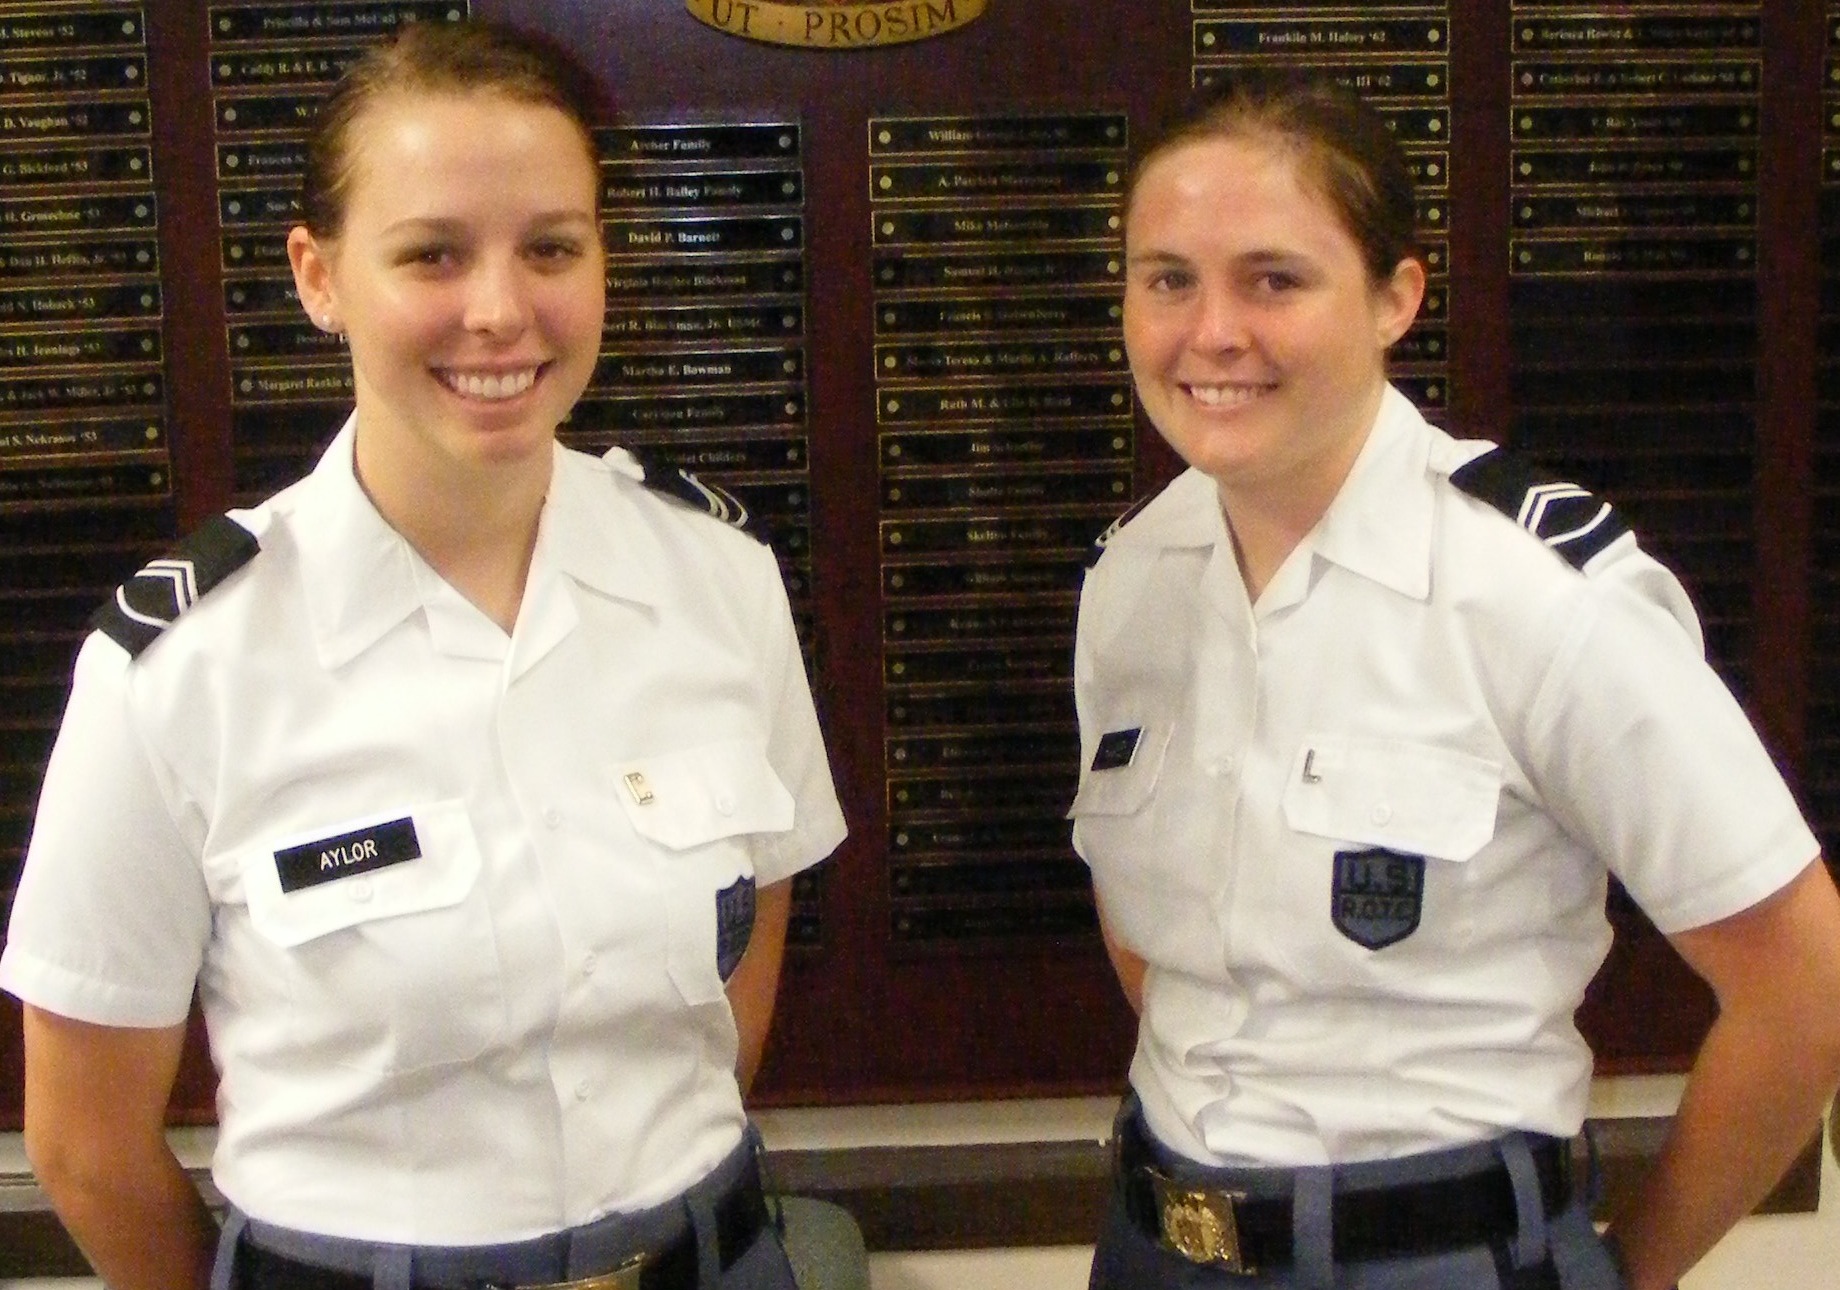 Cadets Michelle Aylor and Kirsten Hughes in the Brodie Hall lounge